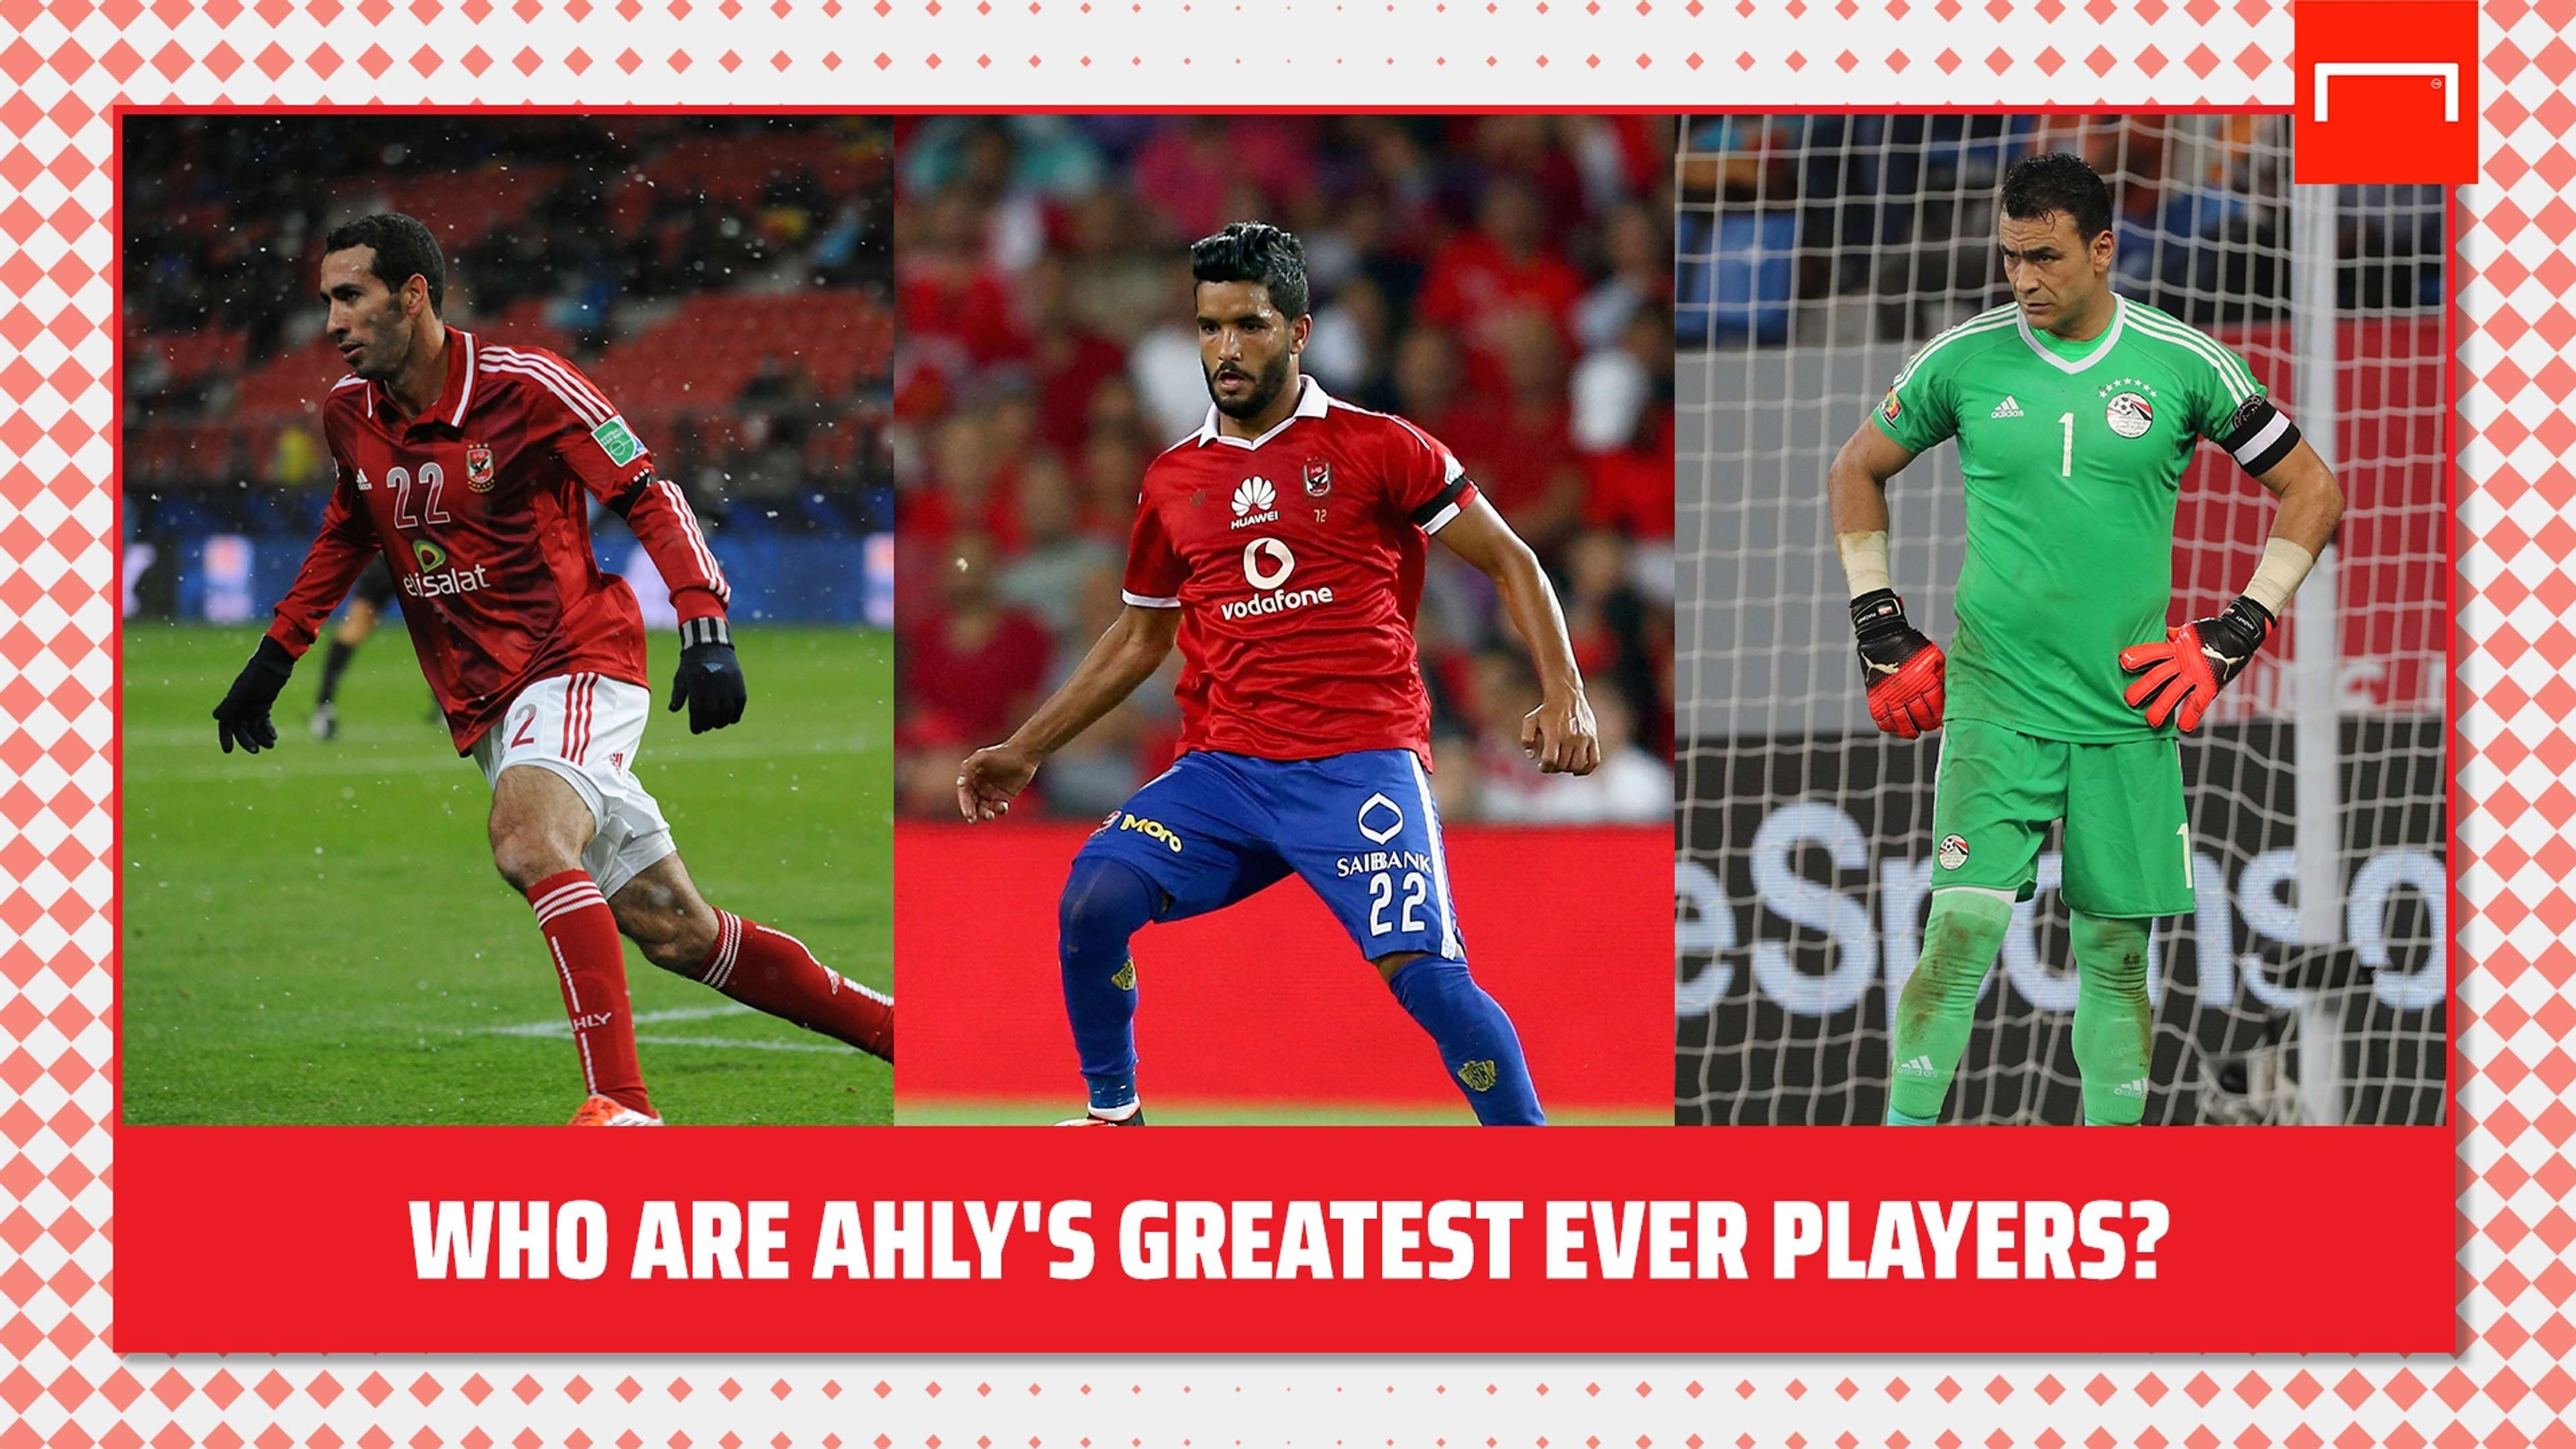 Who are Ahly's greatest ever players